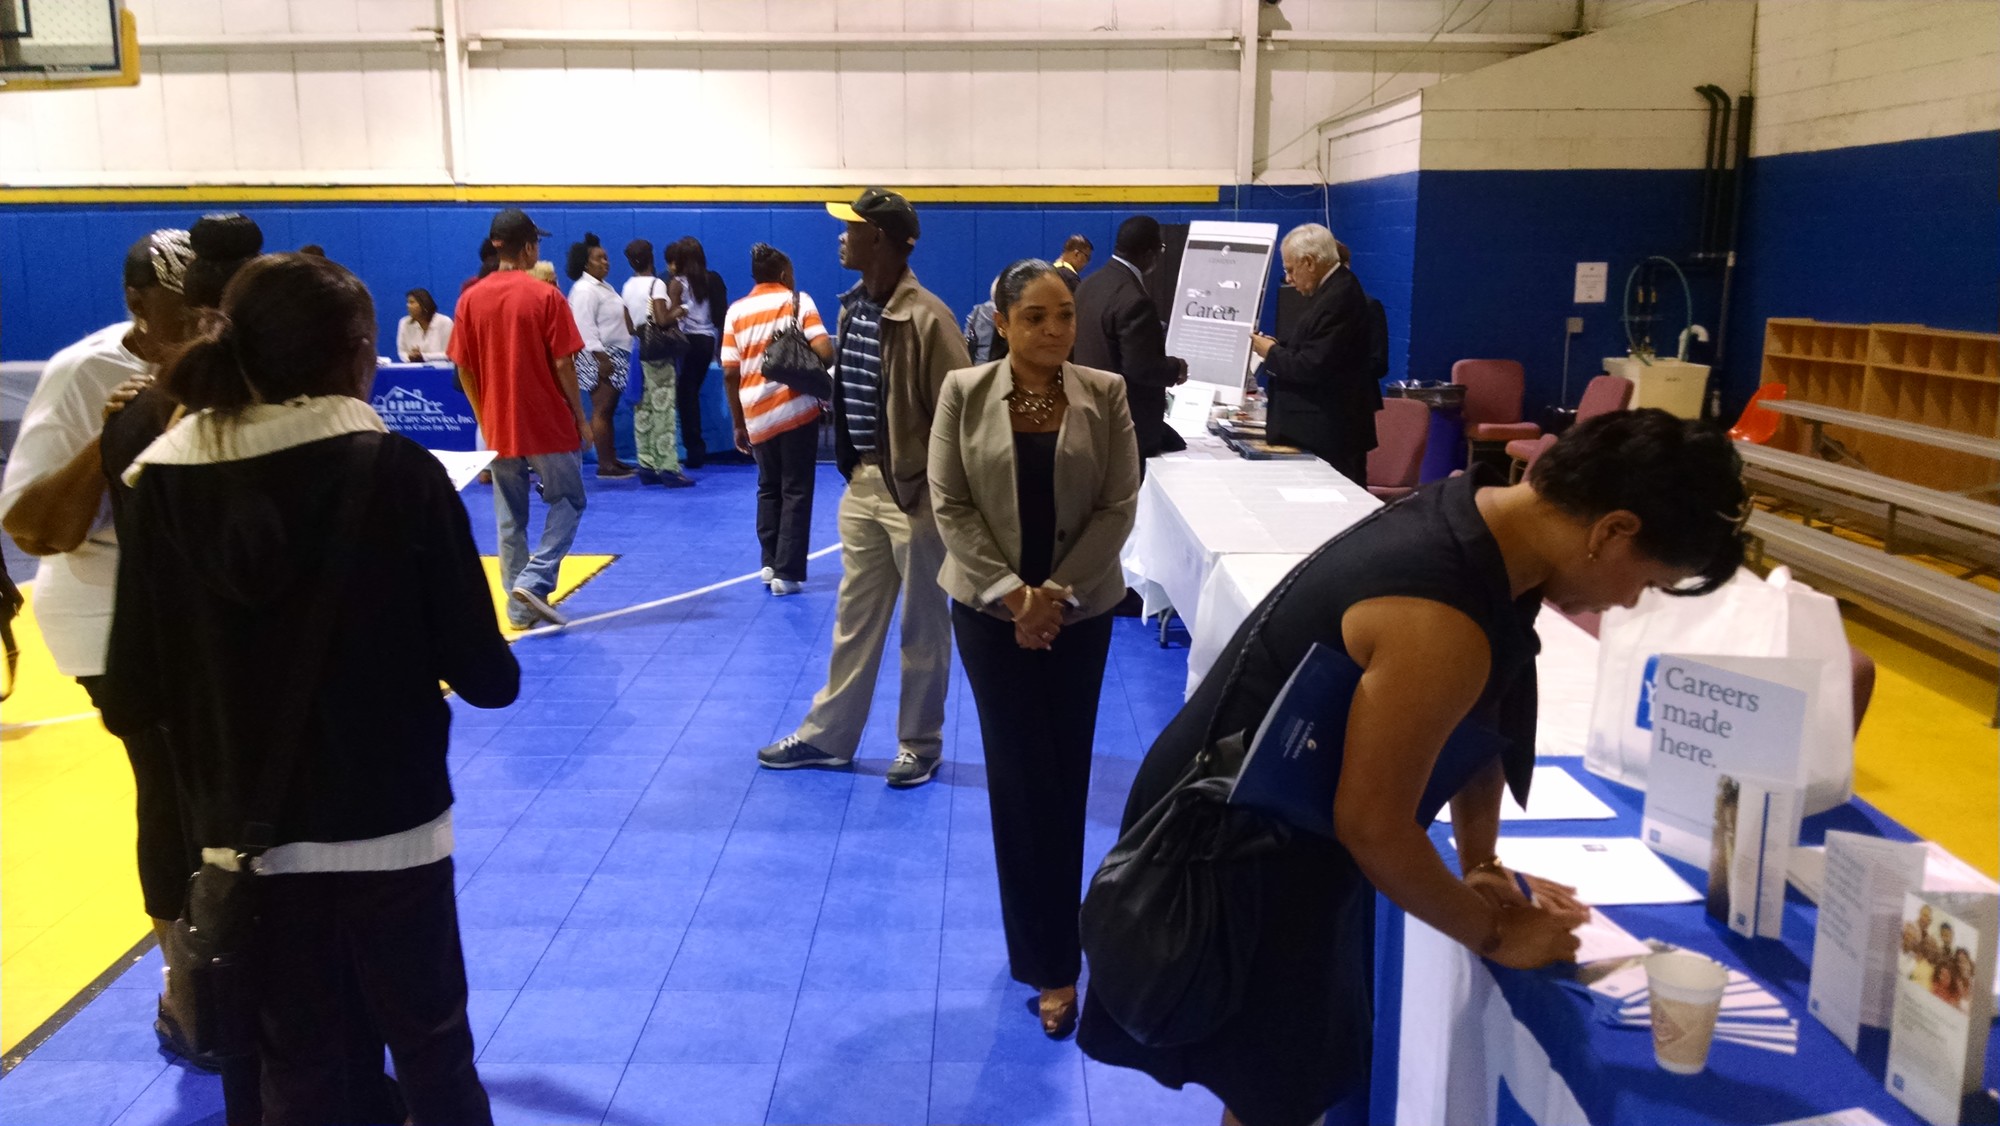 A large number of companies, offering a wide variety of jobs, were represented at the fair.